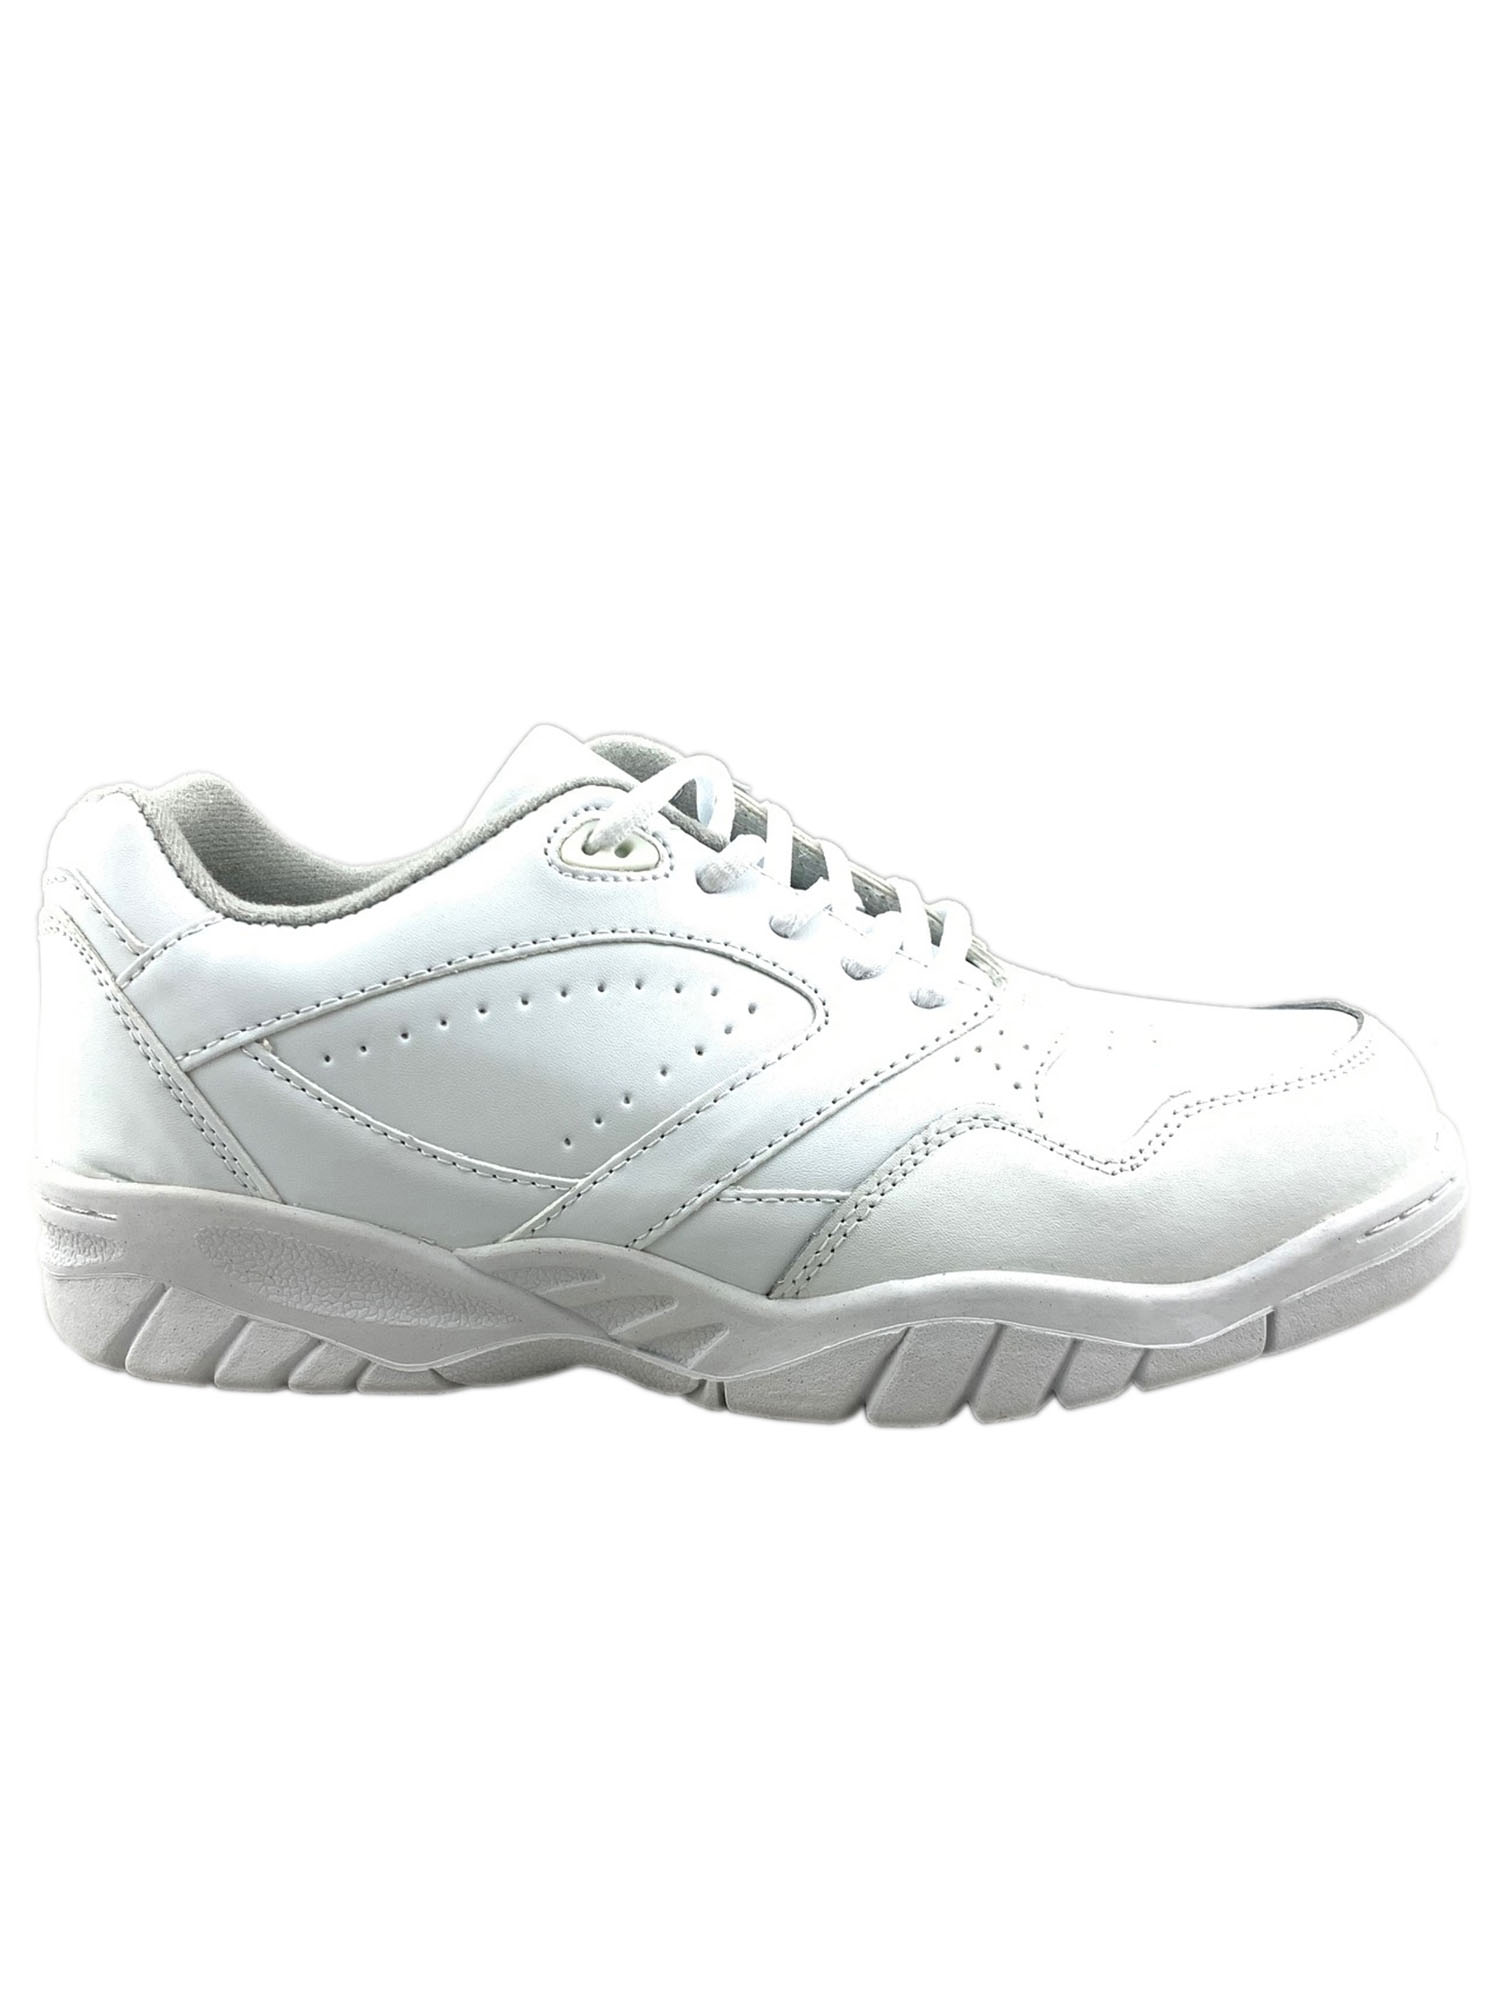 Tanleewa Men's Leather White Sports Shoes Lightweight Sneakers Breathable Casual Shoe Size 9.5 - image 1 of 5